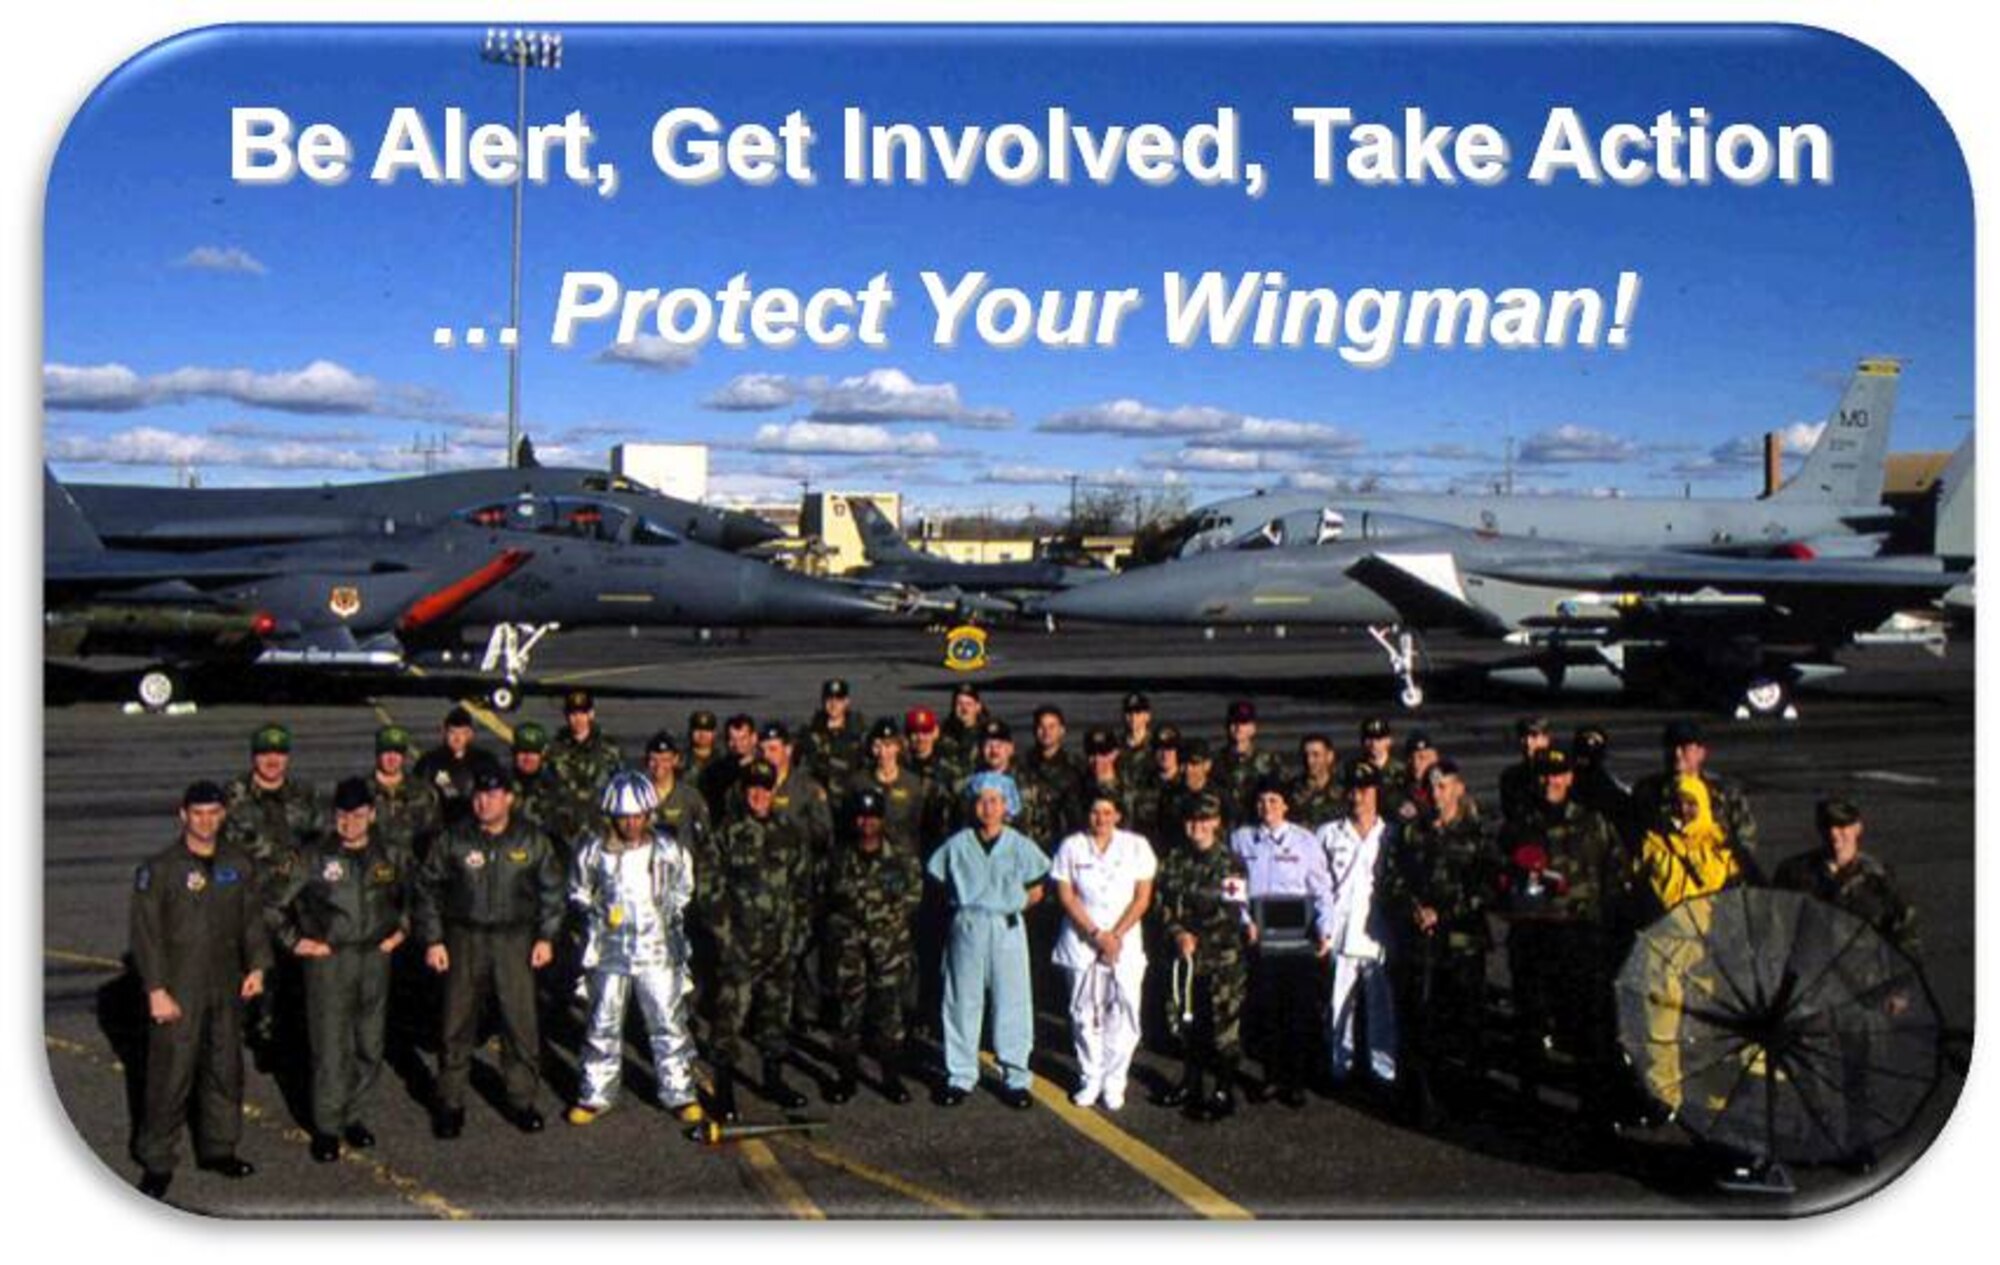 Wingman intervention is one part of AFMC's culture of respect and resiliency.